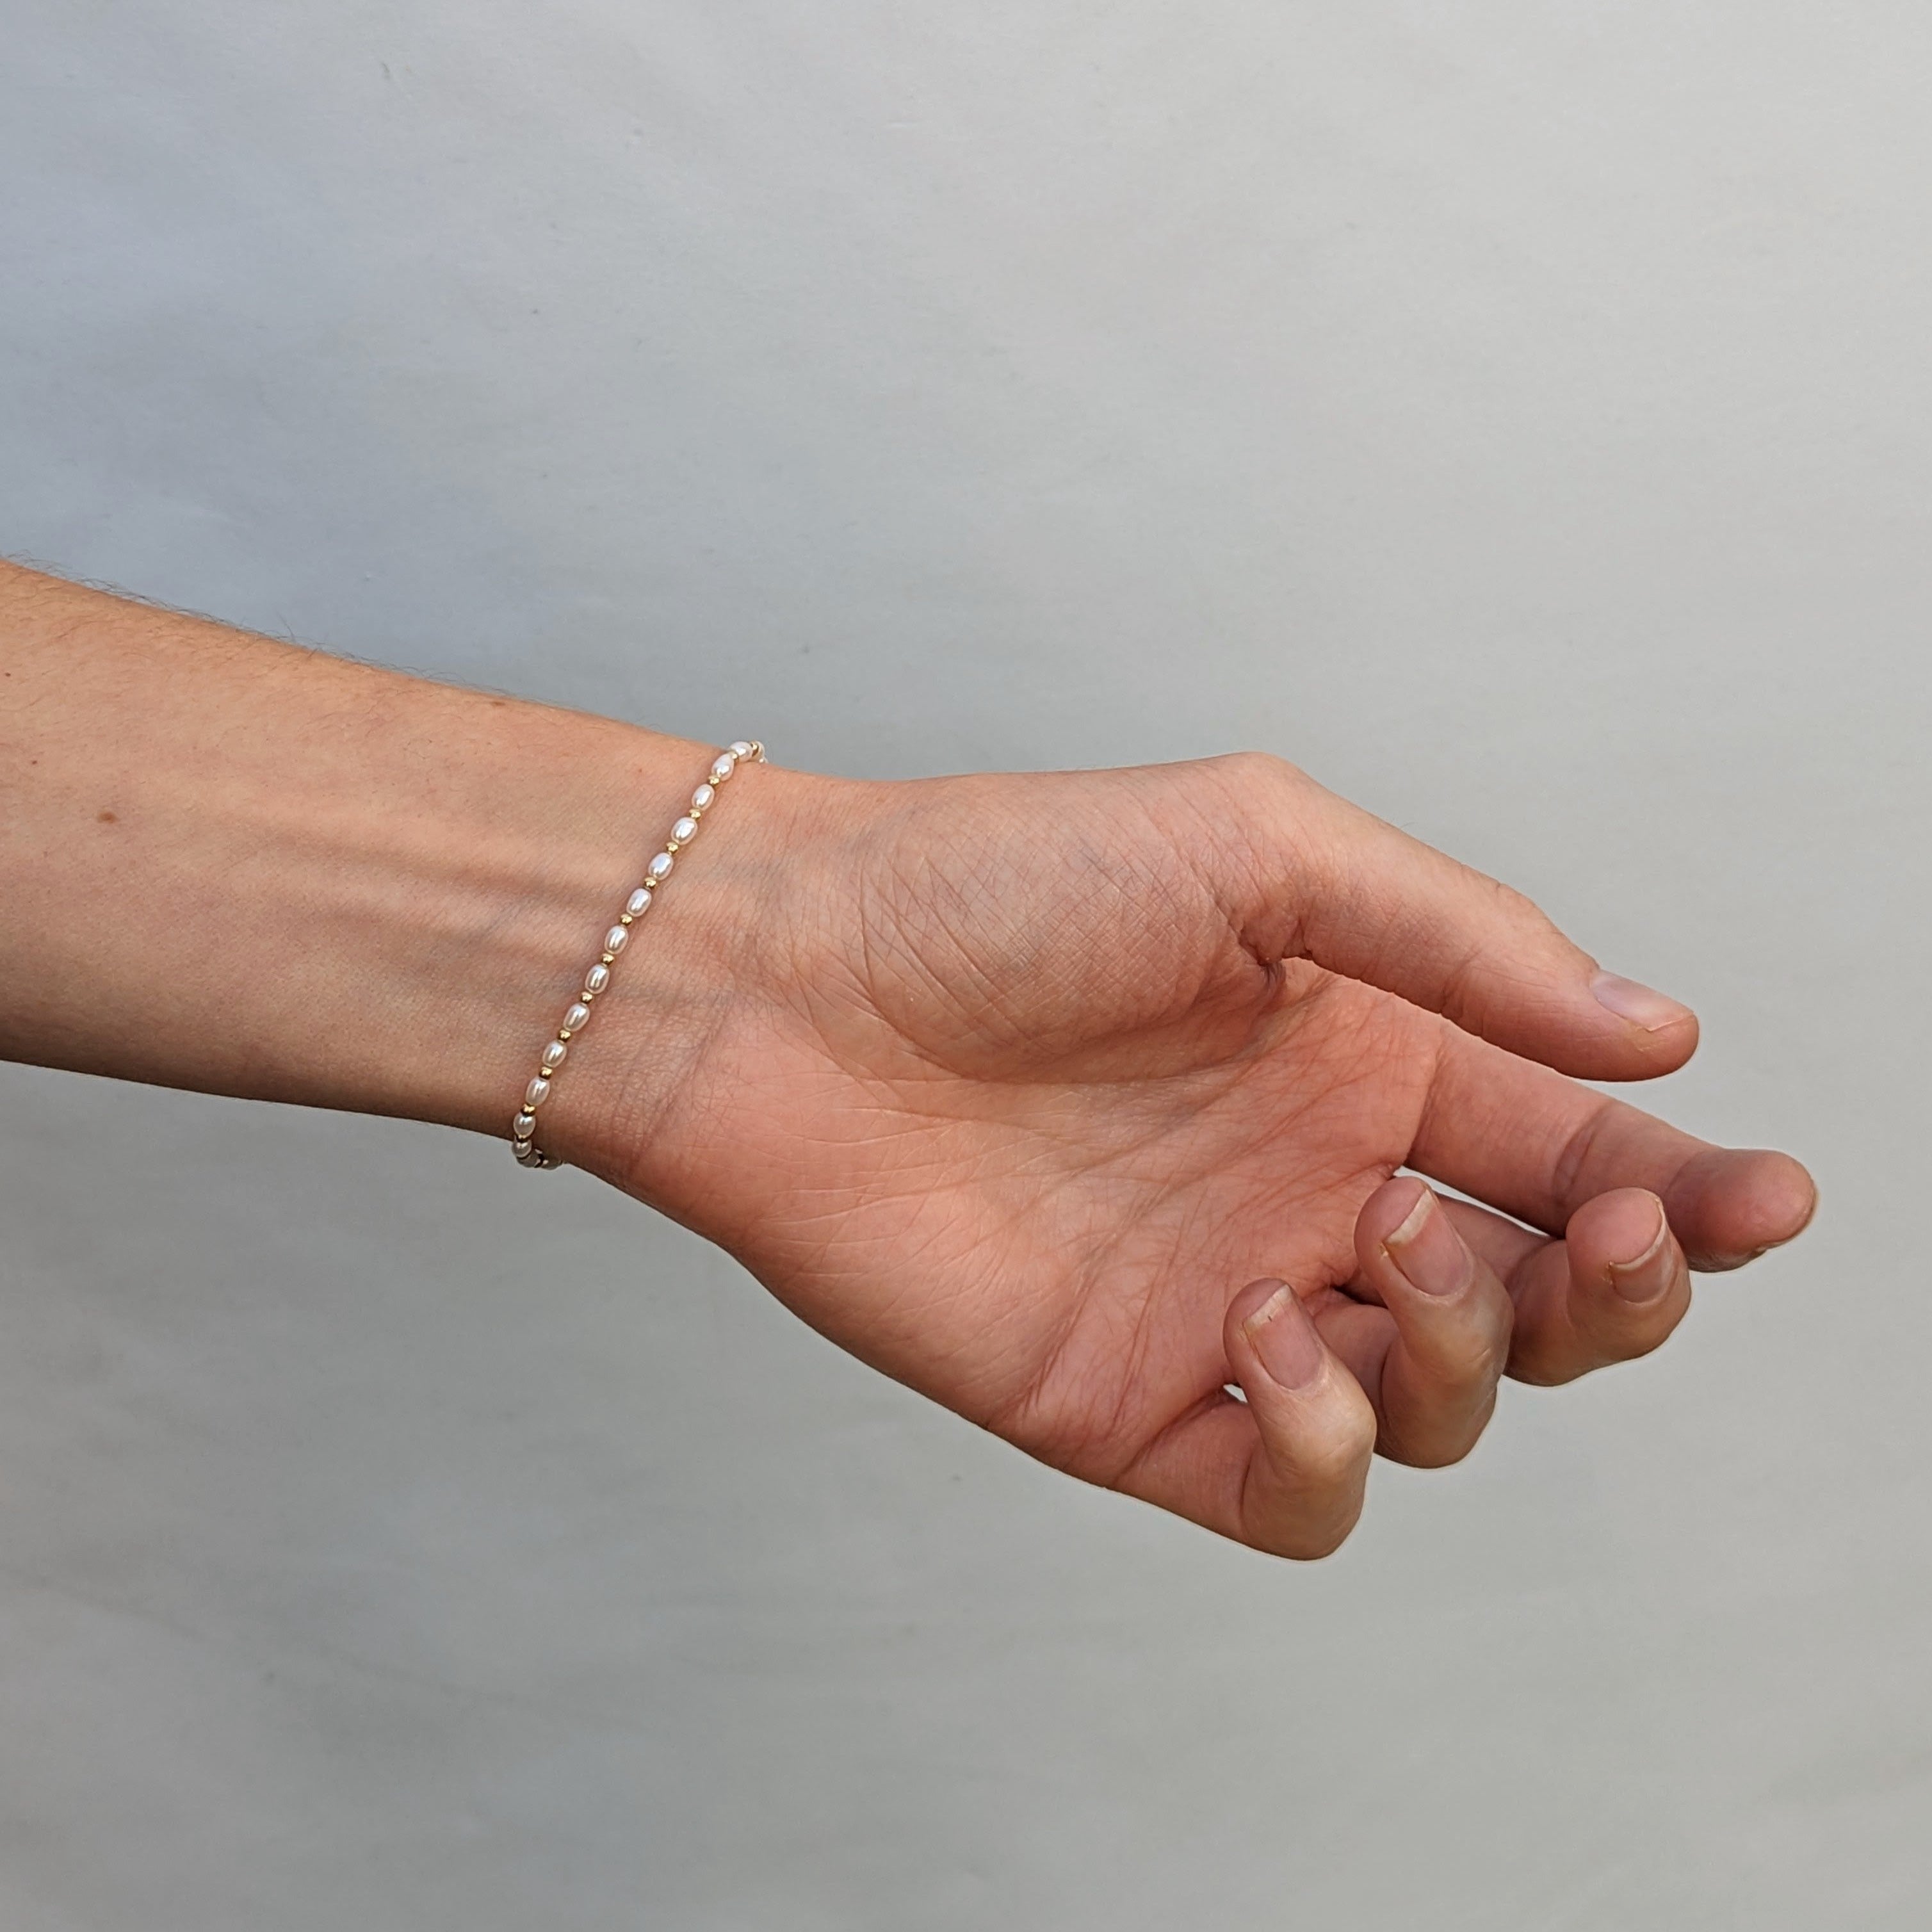 Hand and wrist wearing a small pearl and bead bracelet